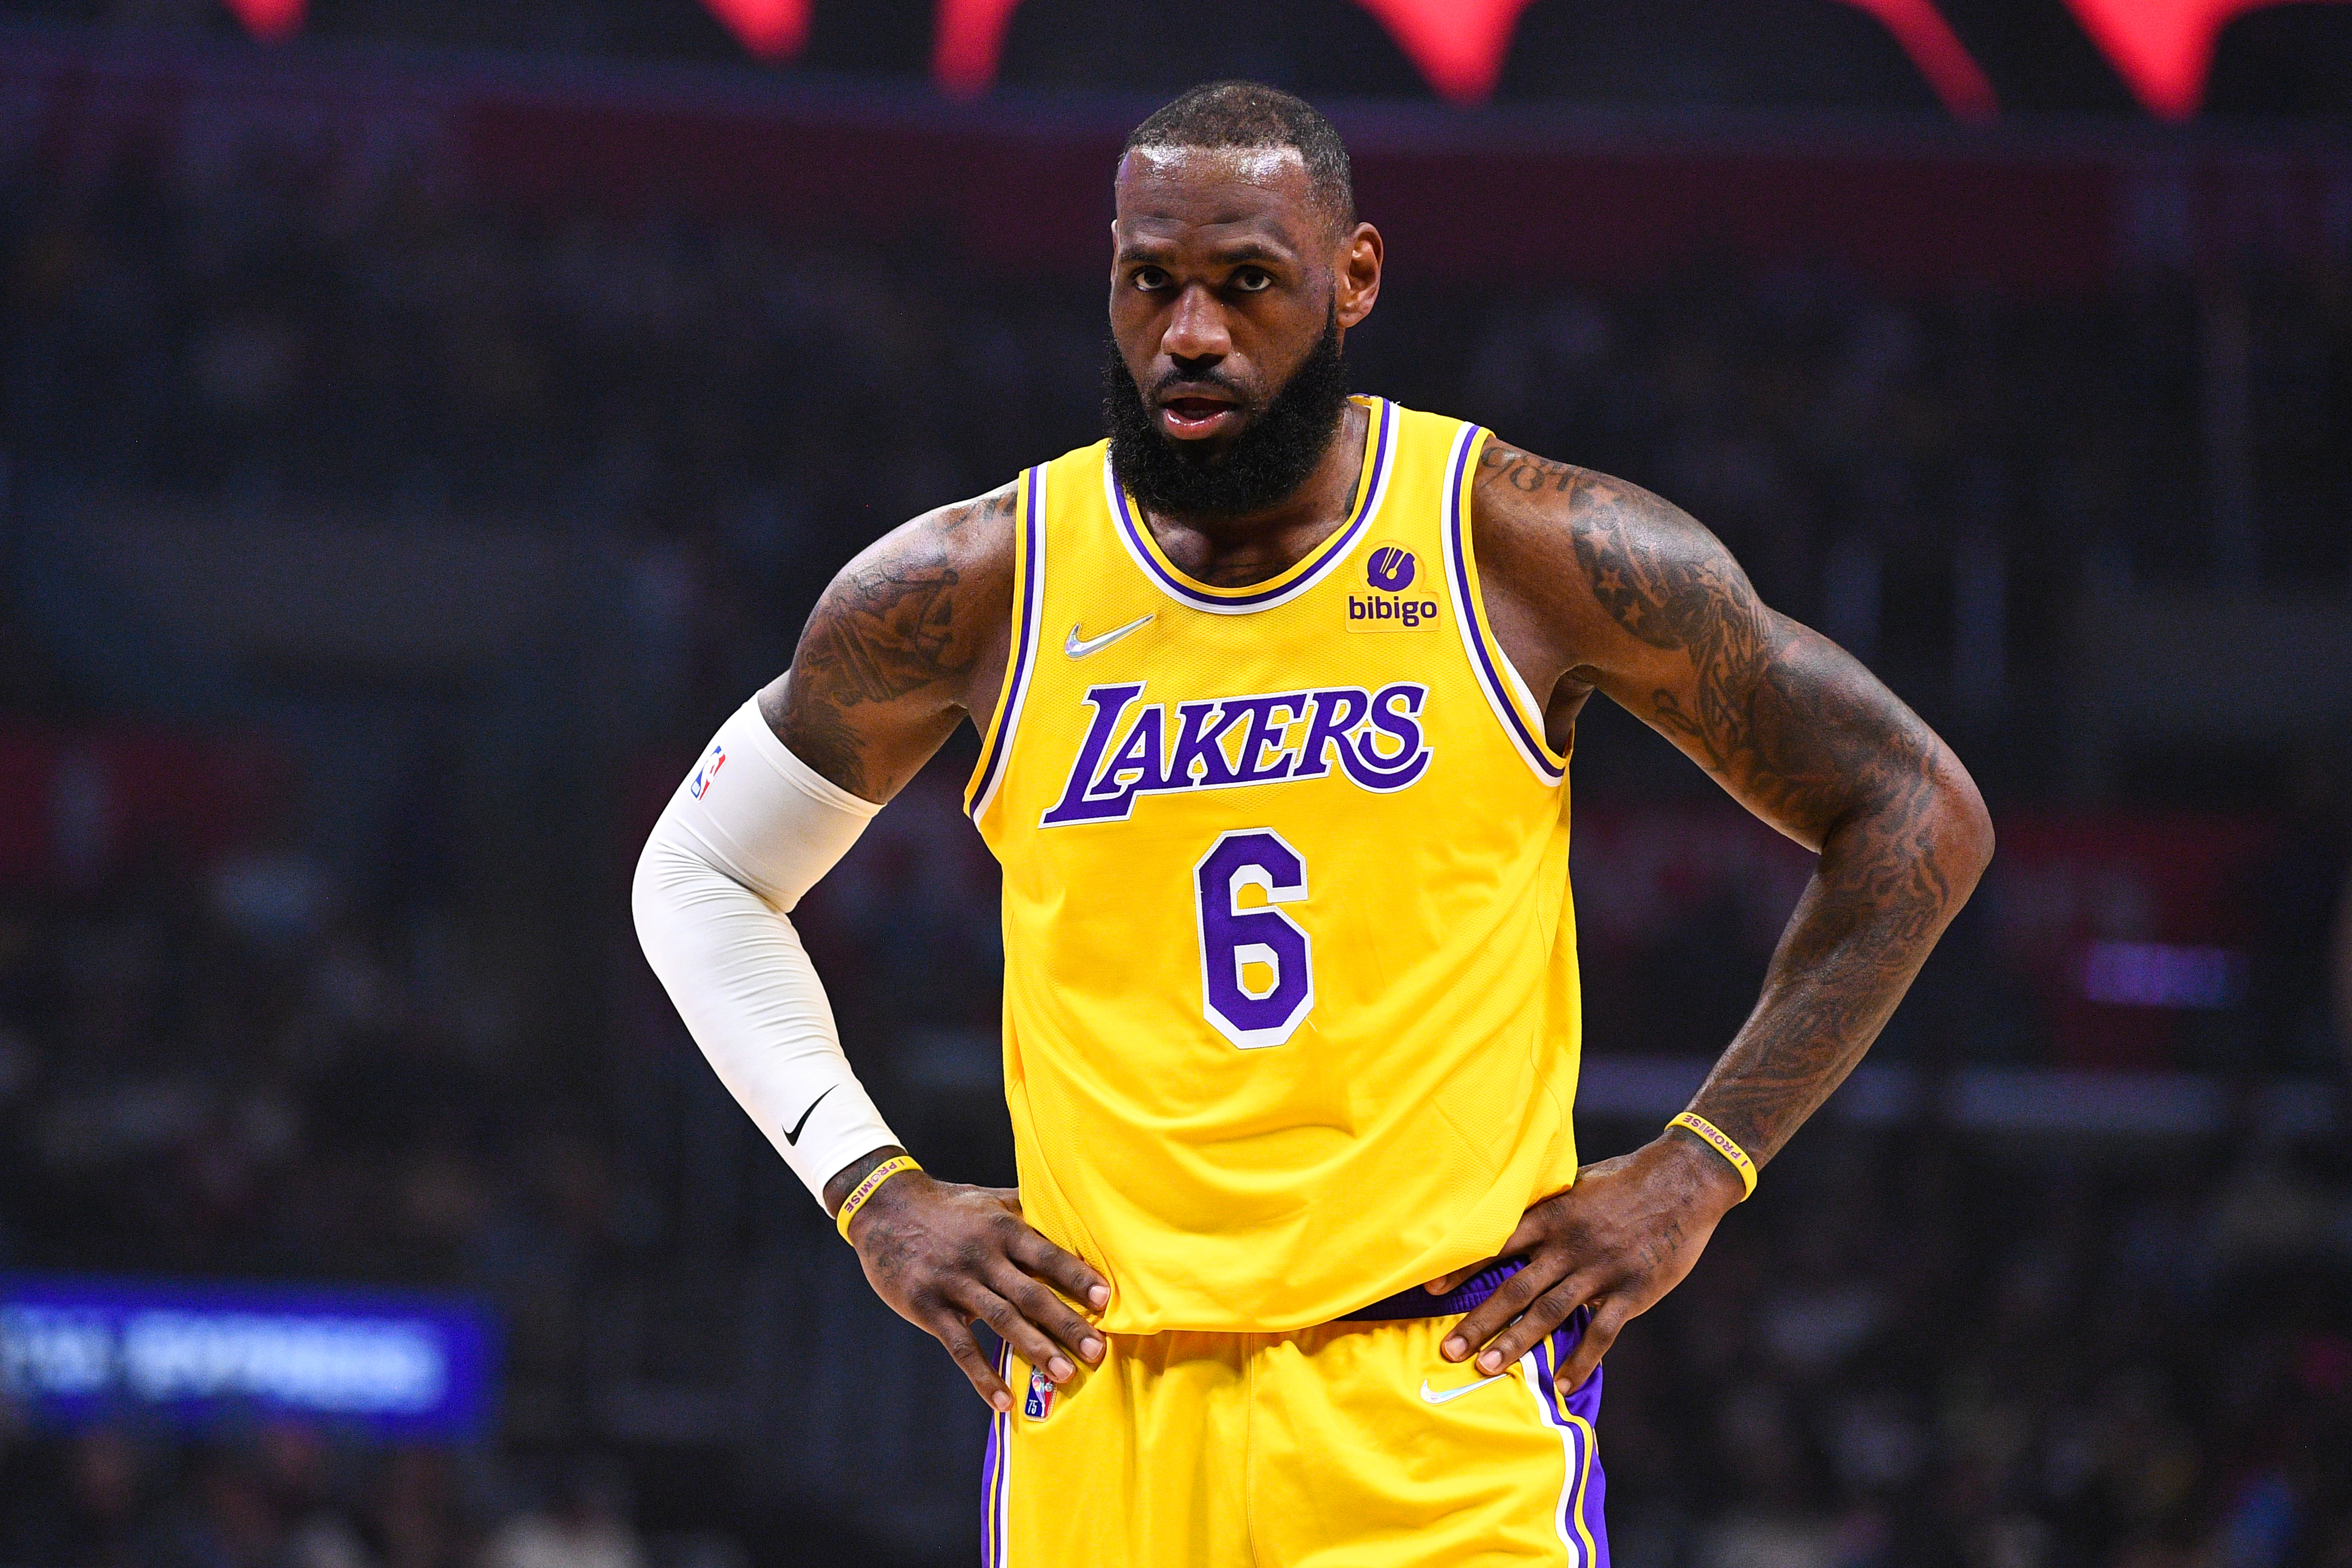 Lakers forward LeBron James reacts to a play during a game against the Clippers.